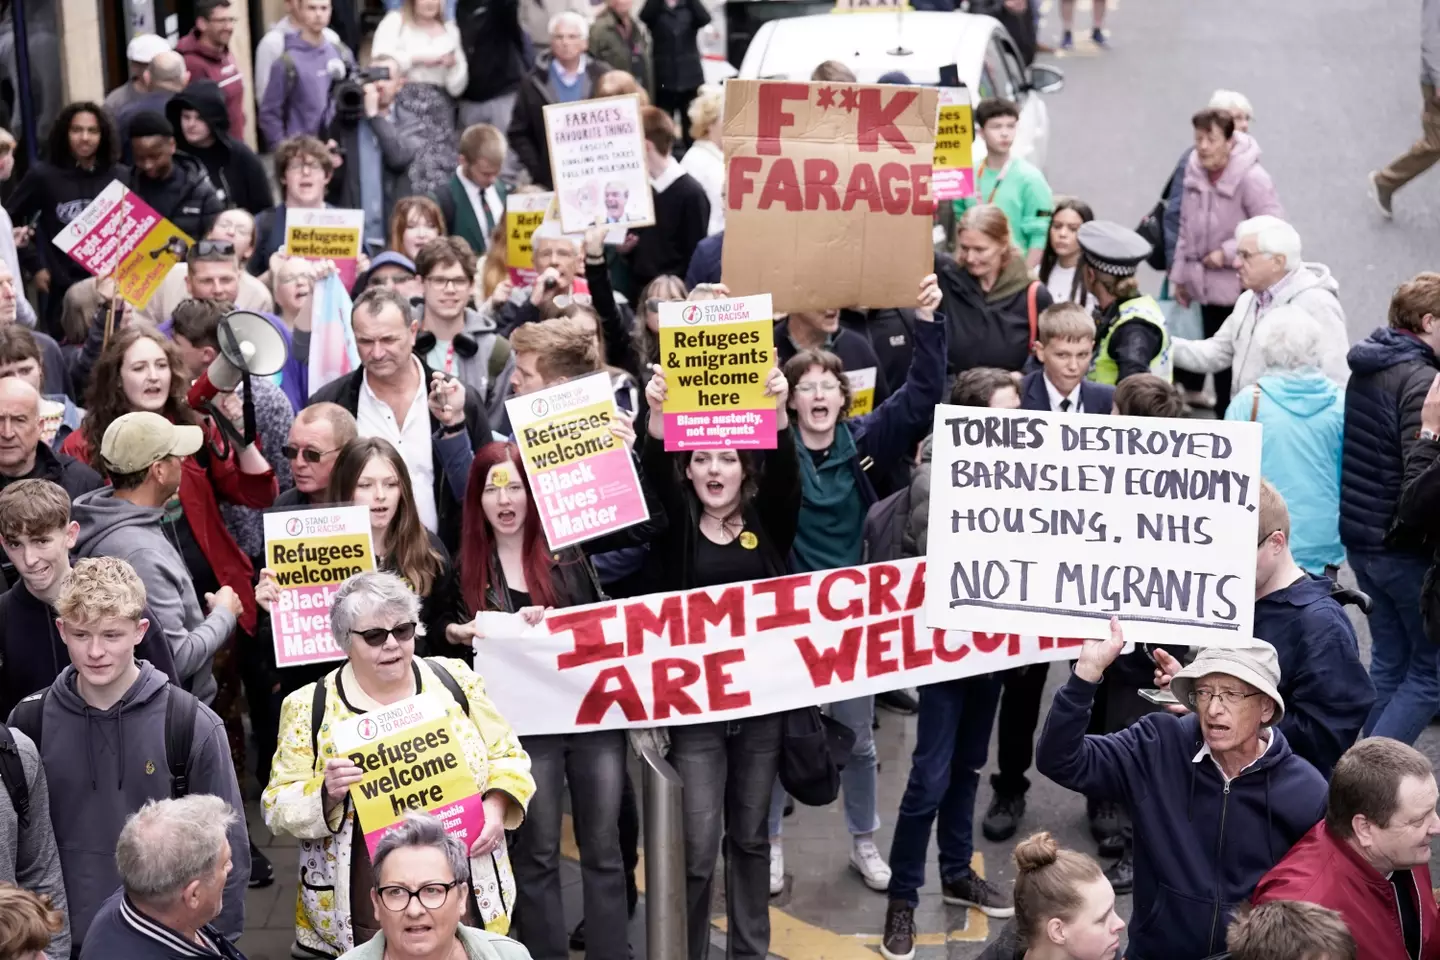 There were demonstrations against the Reform UK leader as his bus toured Barnsley. (PA)